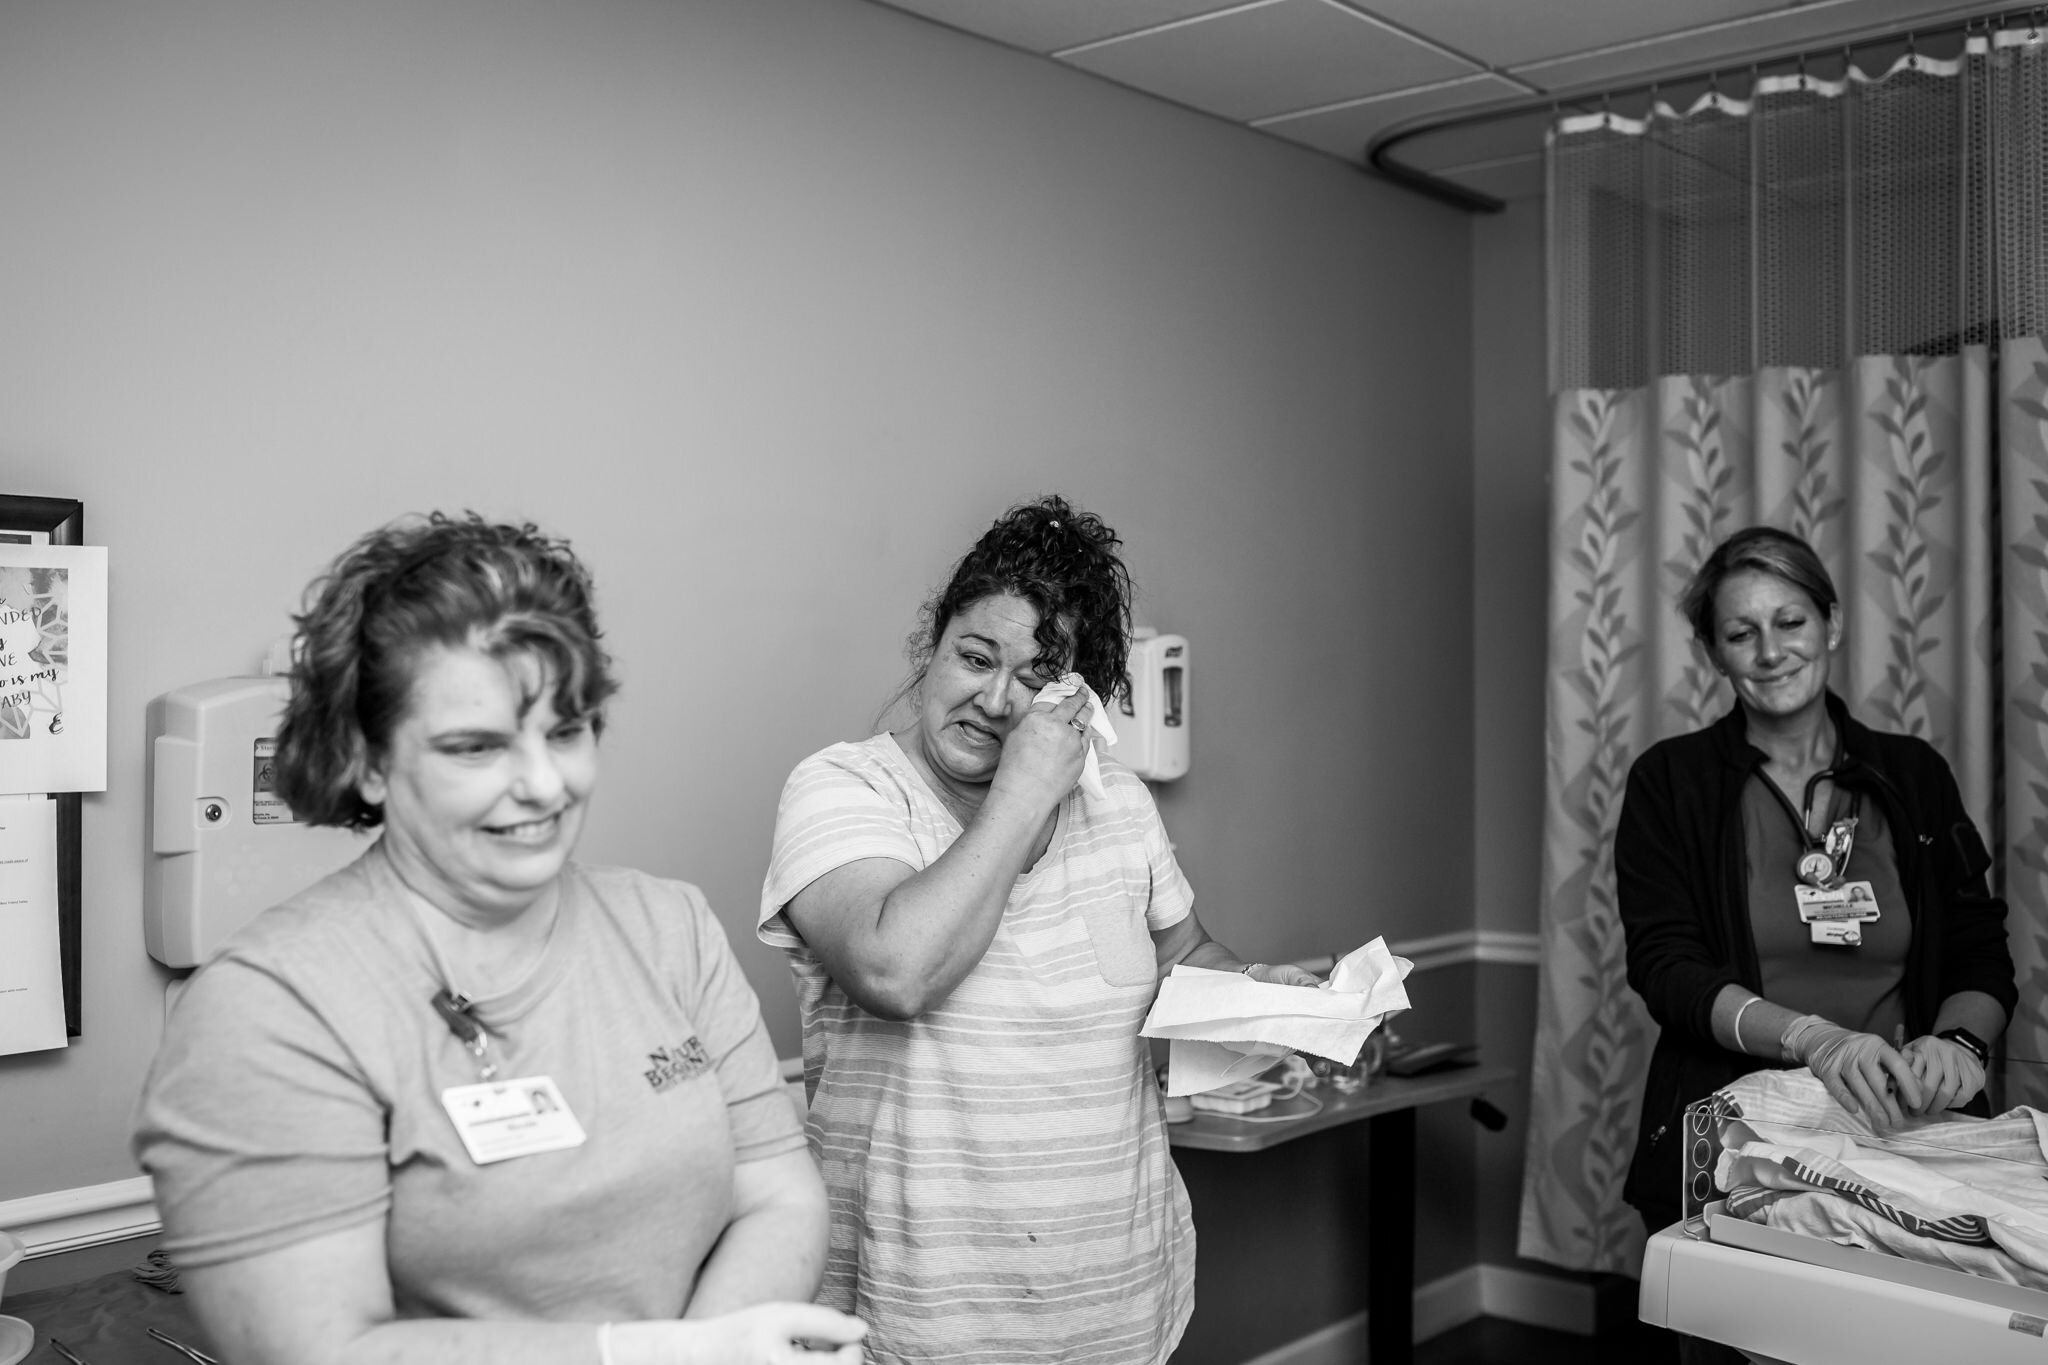 grandma cries while midwife looks on during hospital birth